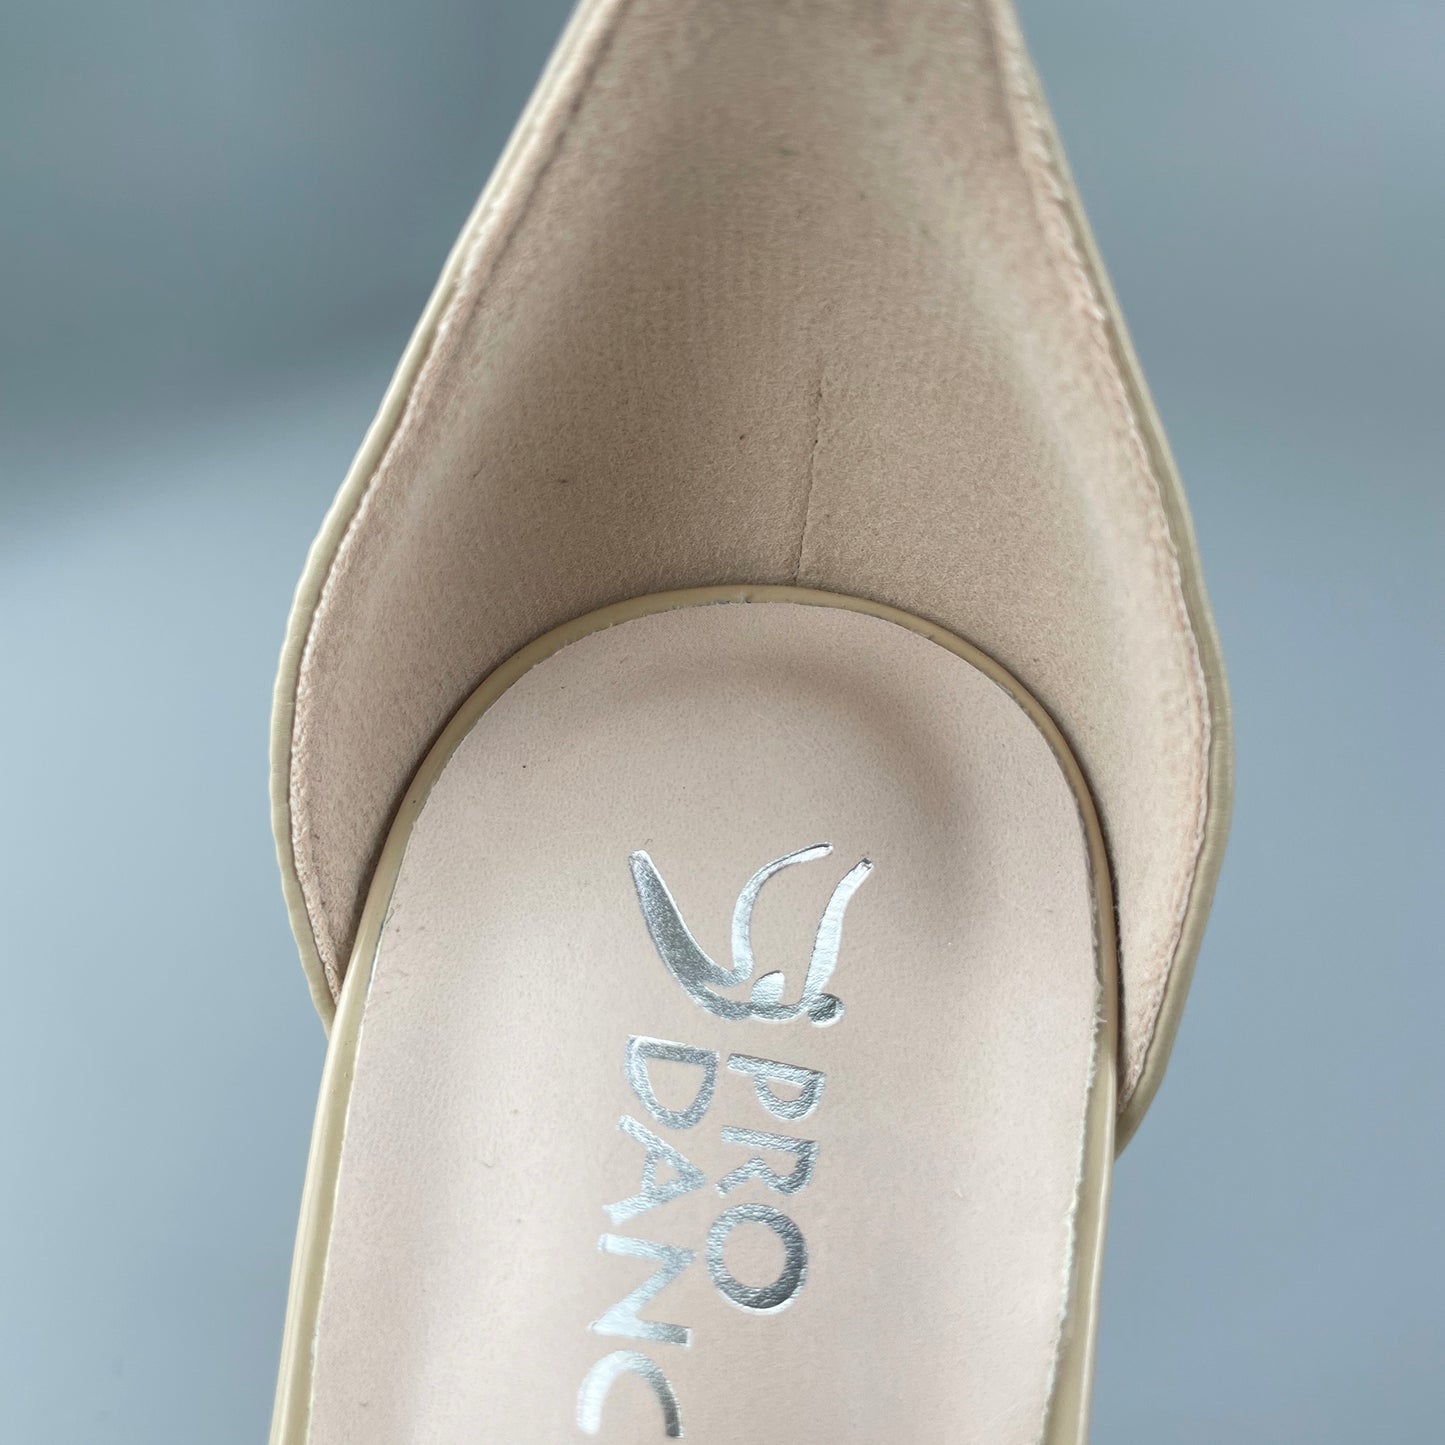 Pro Dancer Peep-toe Argentine Tango Shoes Closed-back High Heels Hard Leather Sole Nude (PD-9047A)